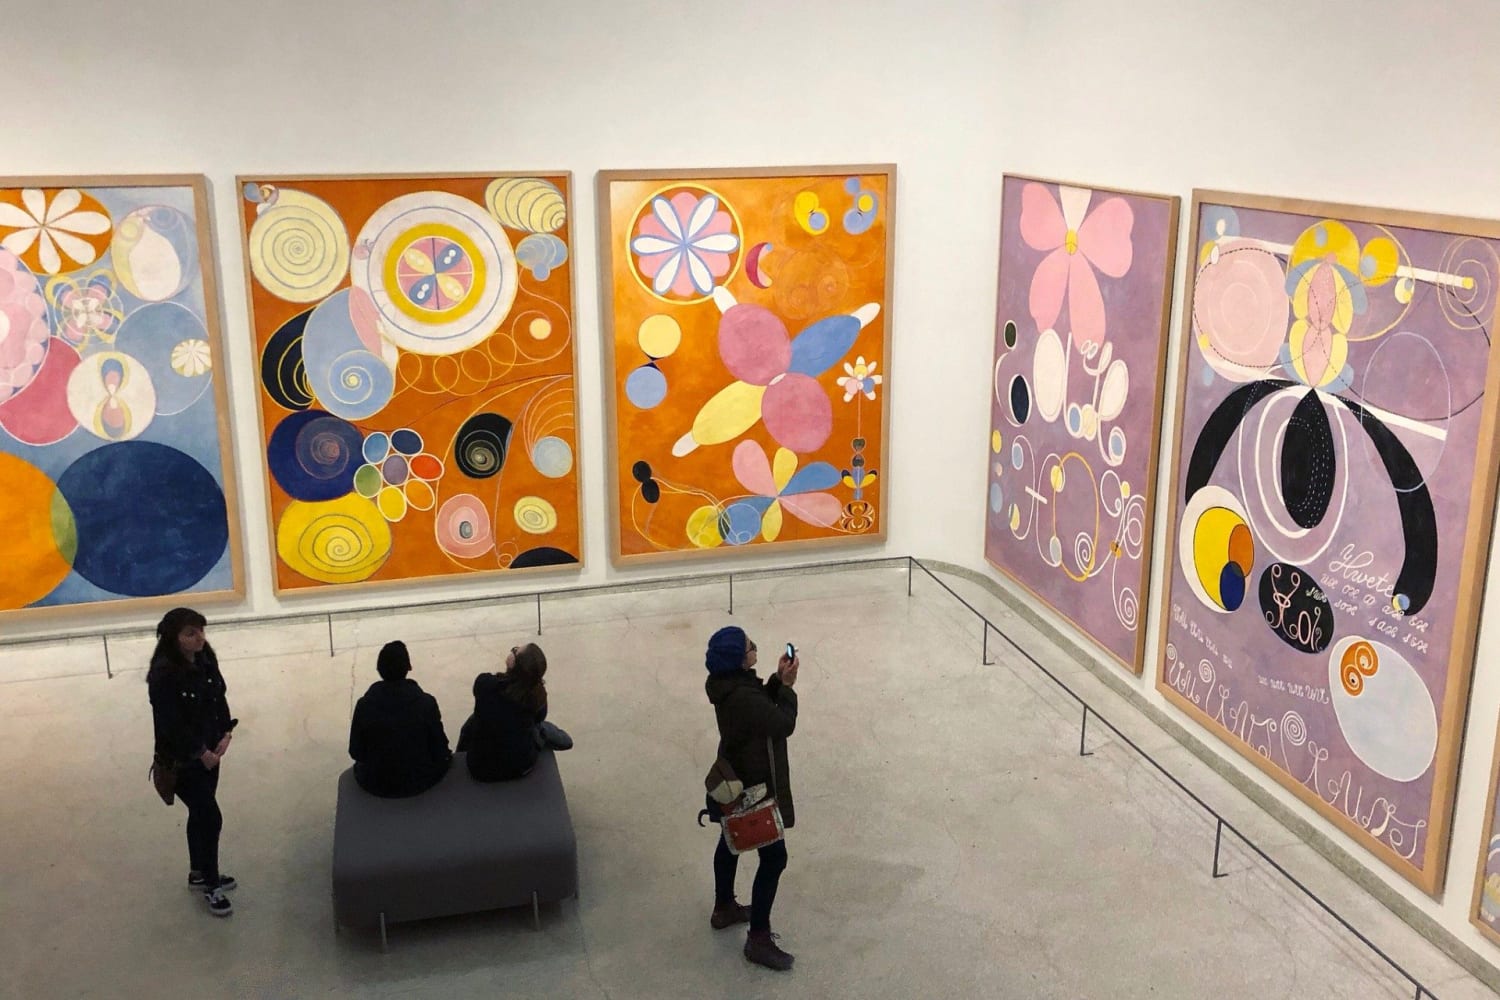 Hilma af Klint - The Abstract Artist Who Painted Invisible Realities